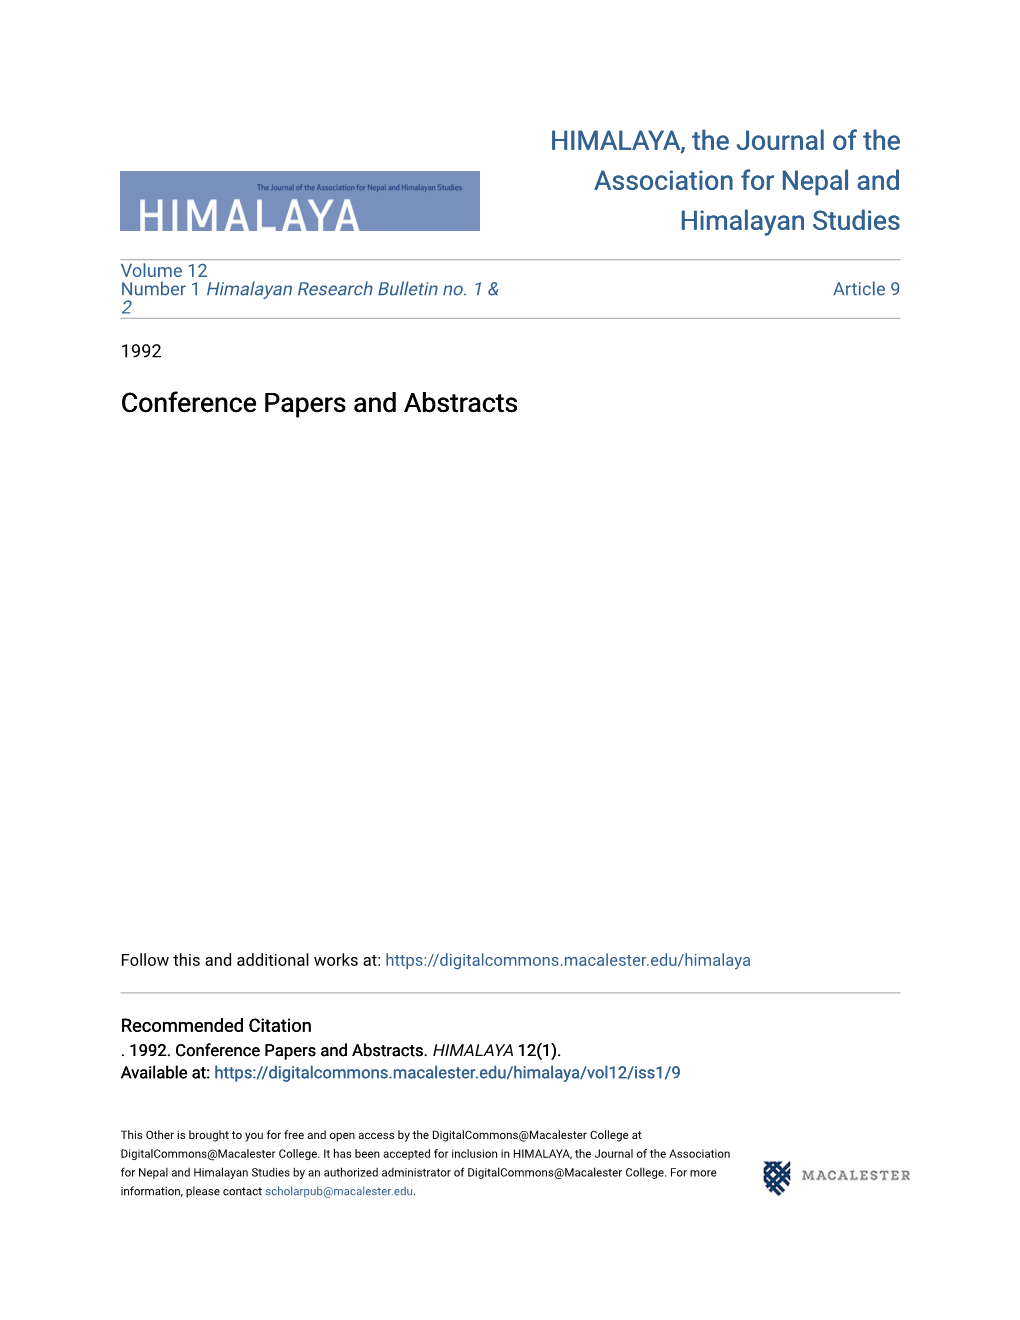 Conference Papers and Abstracts